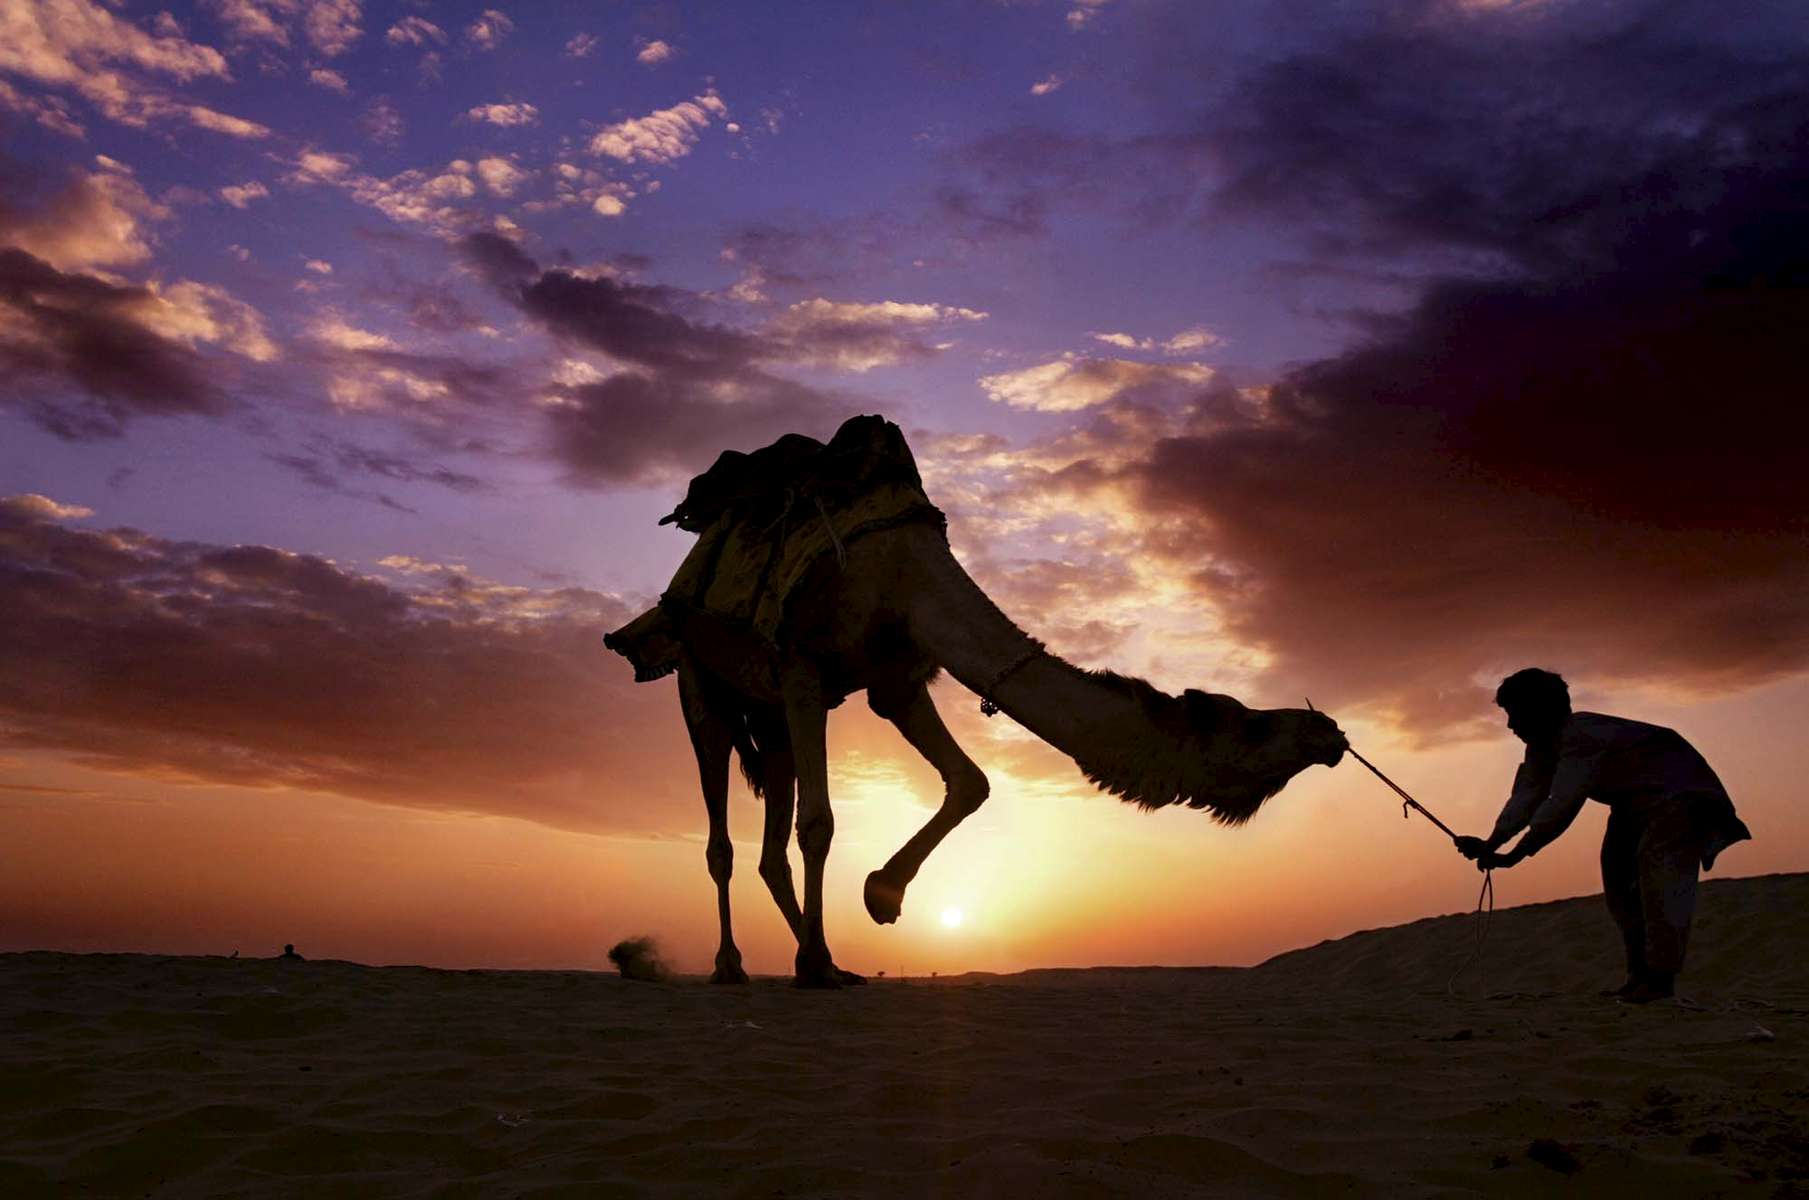 A Rajasthani boy coaxes his camel to rest as the sun sets over the Thar Desert in India.